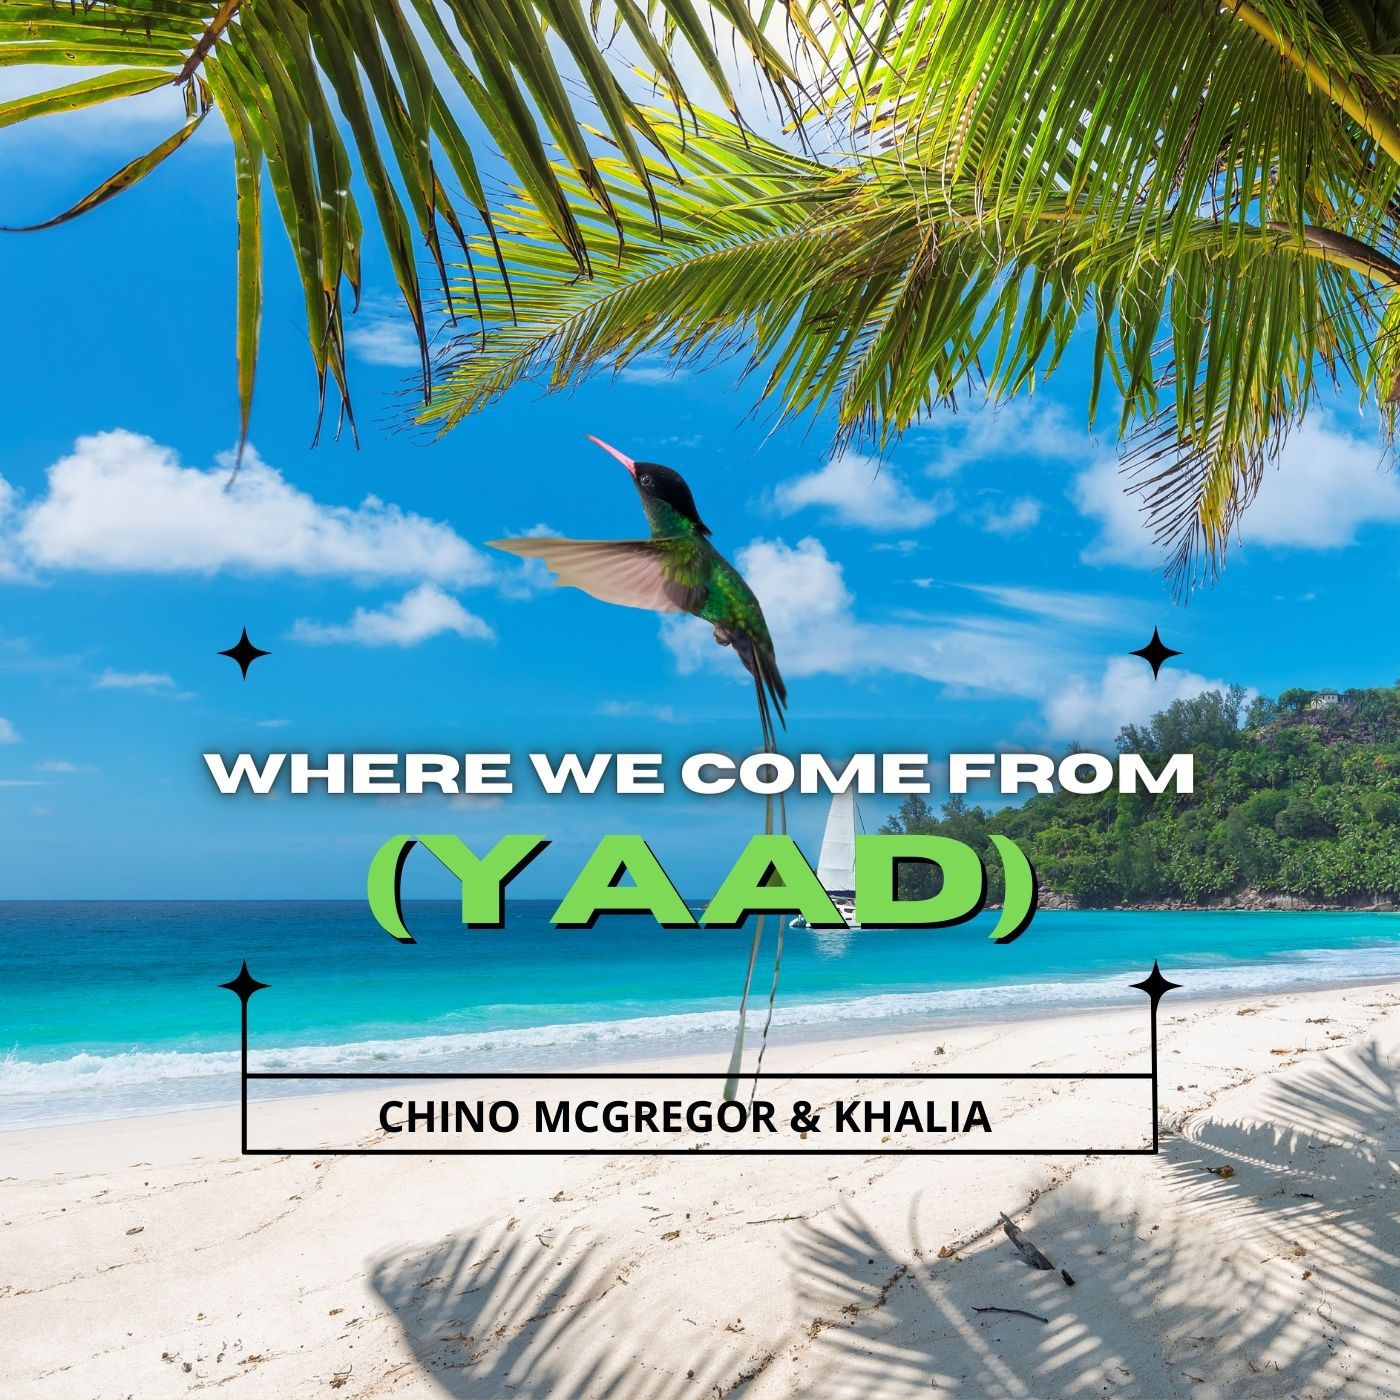 CHINO MCGREGOR, KHALIA - WHERE WE COME FROM(YAAD)